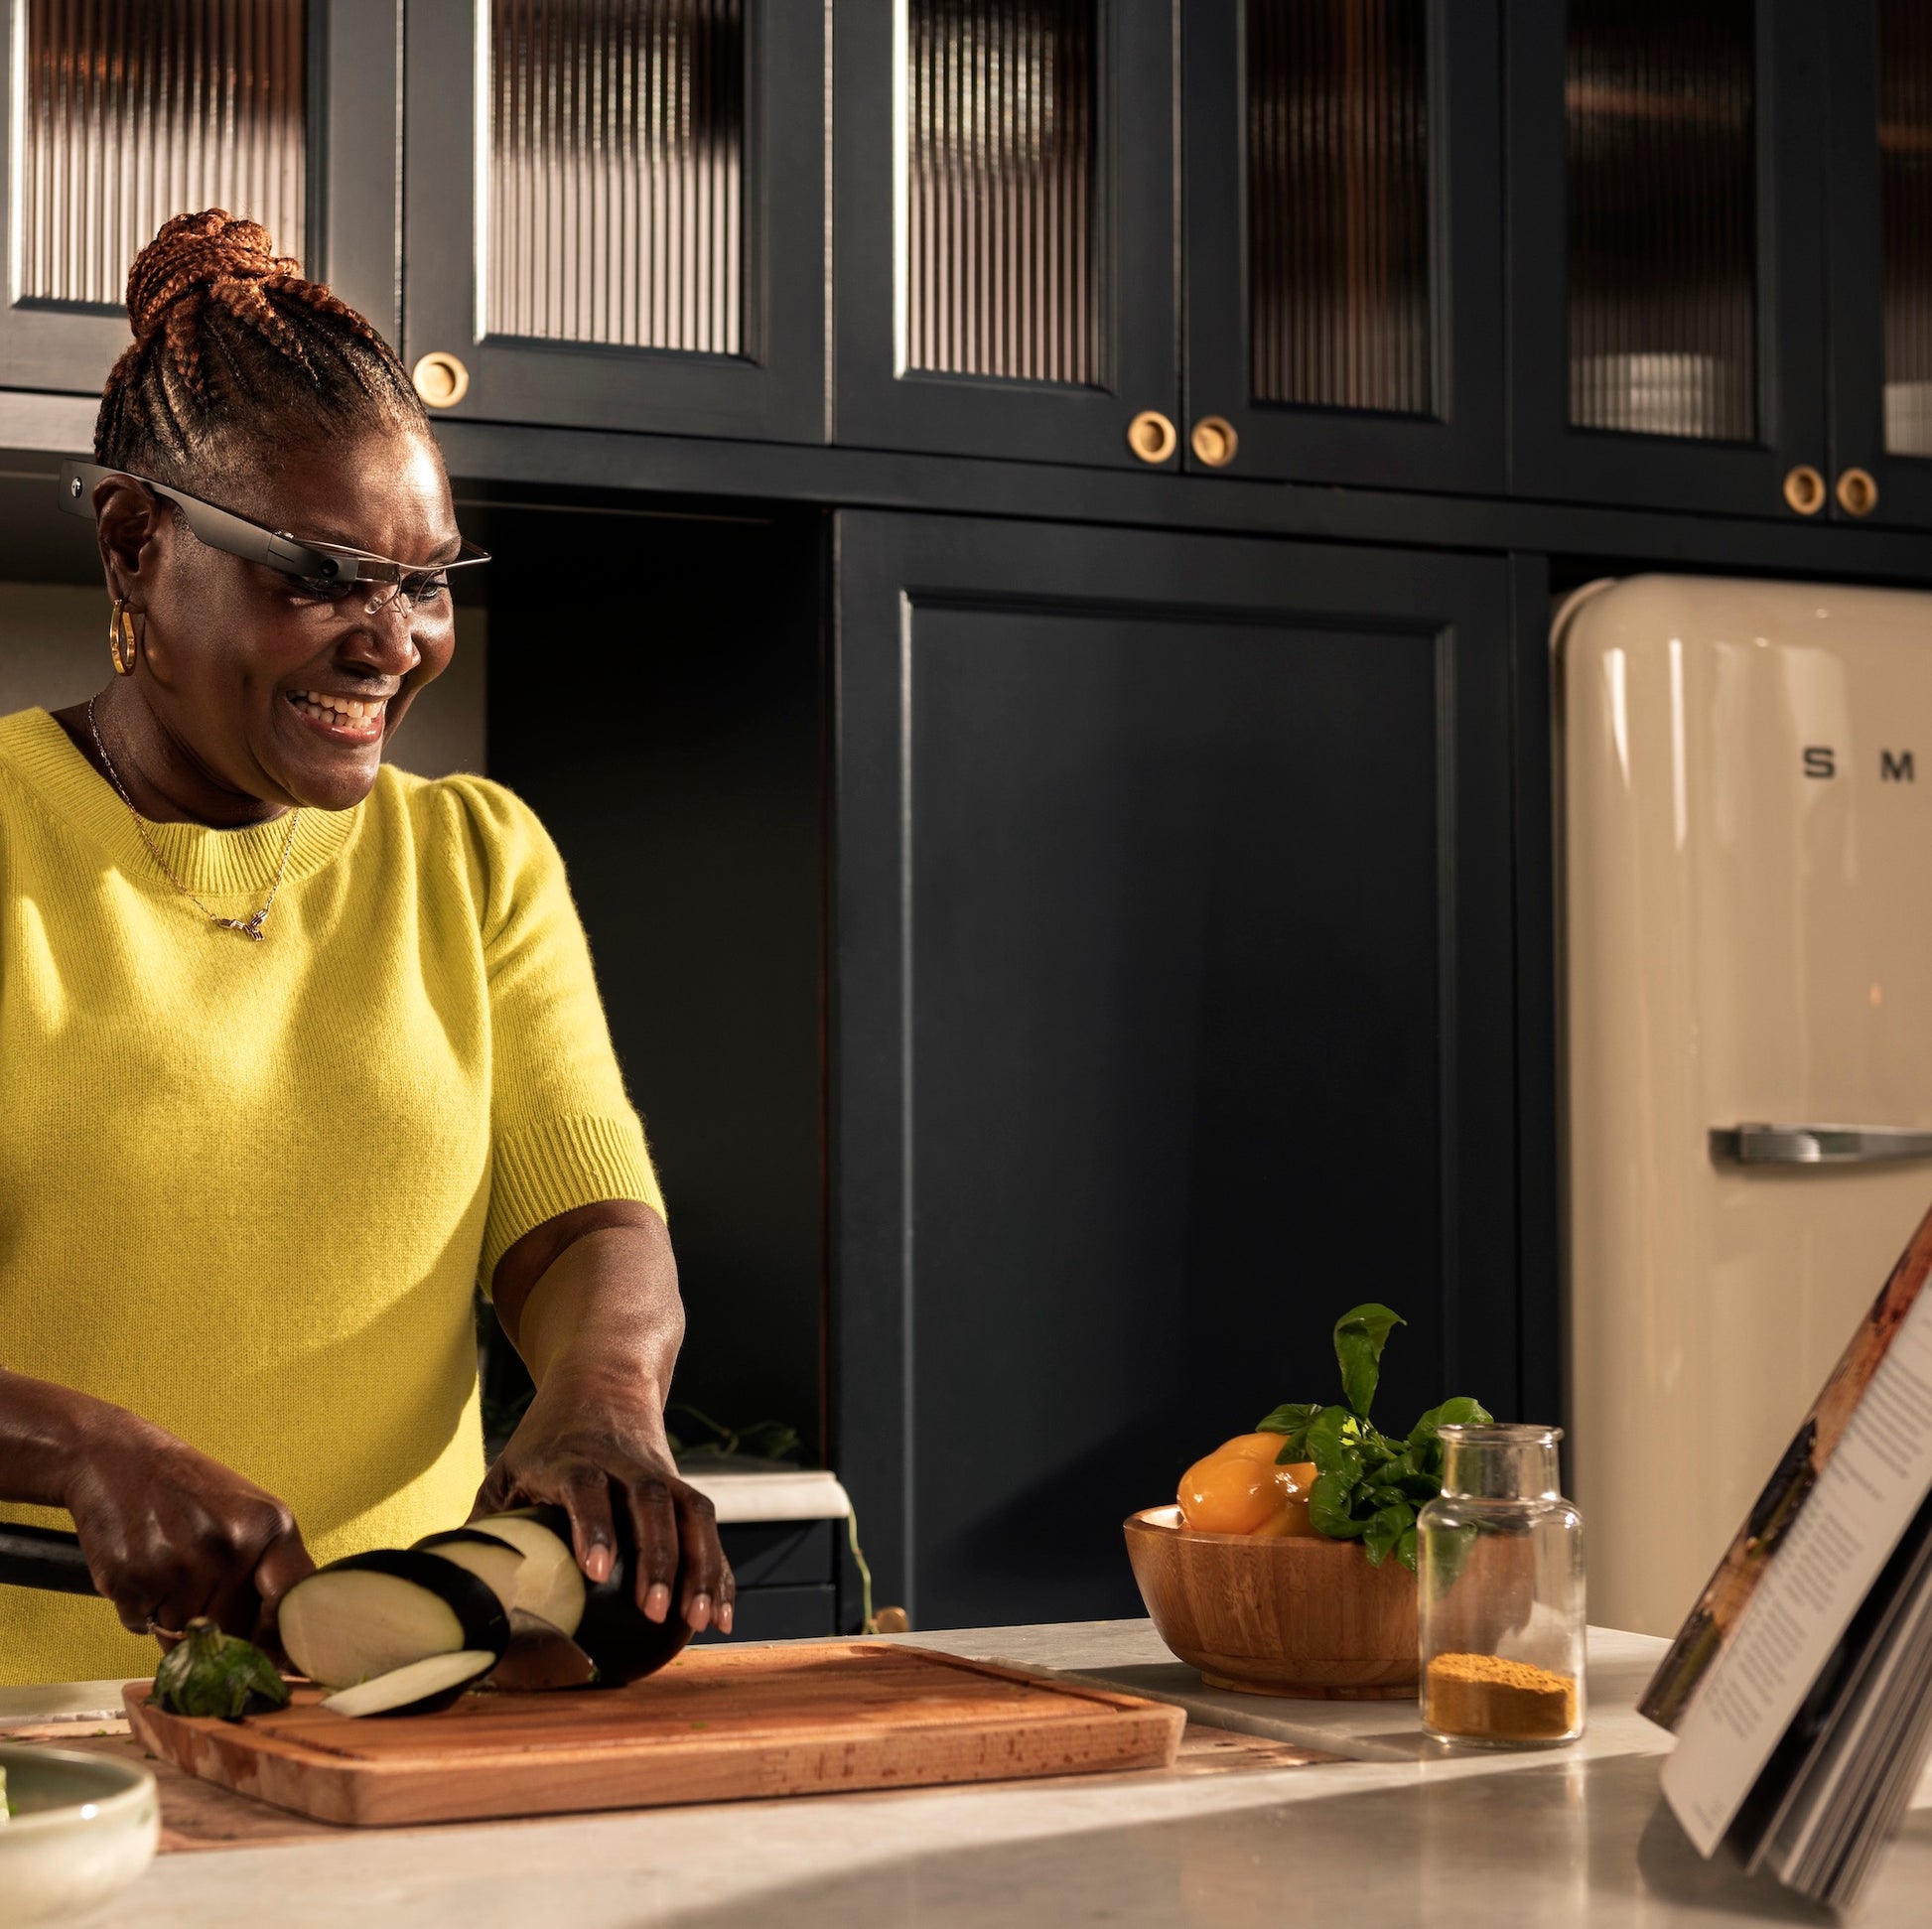 Photo of Joy, she's in the kitchen wearing Envision Glasses and reading a cookbook